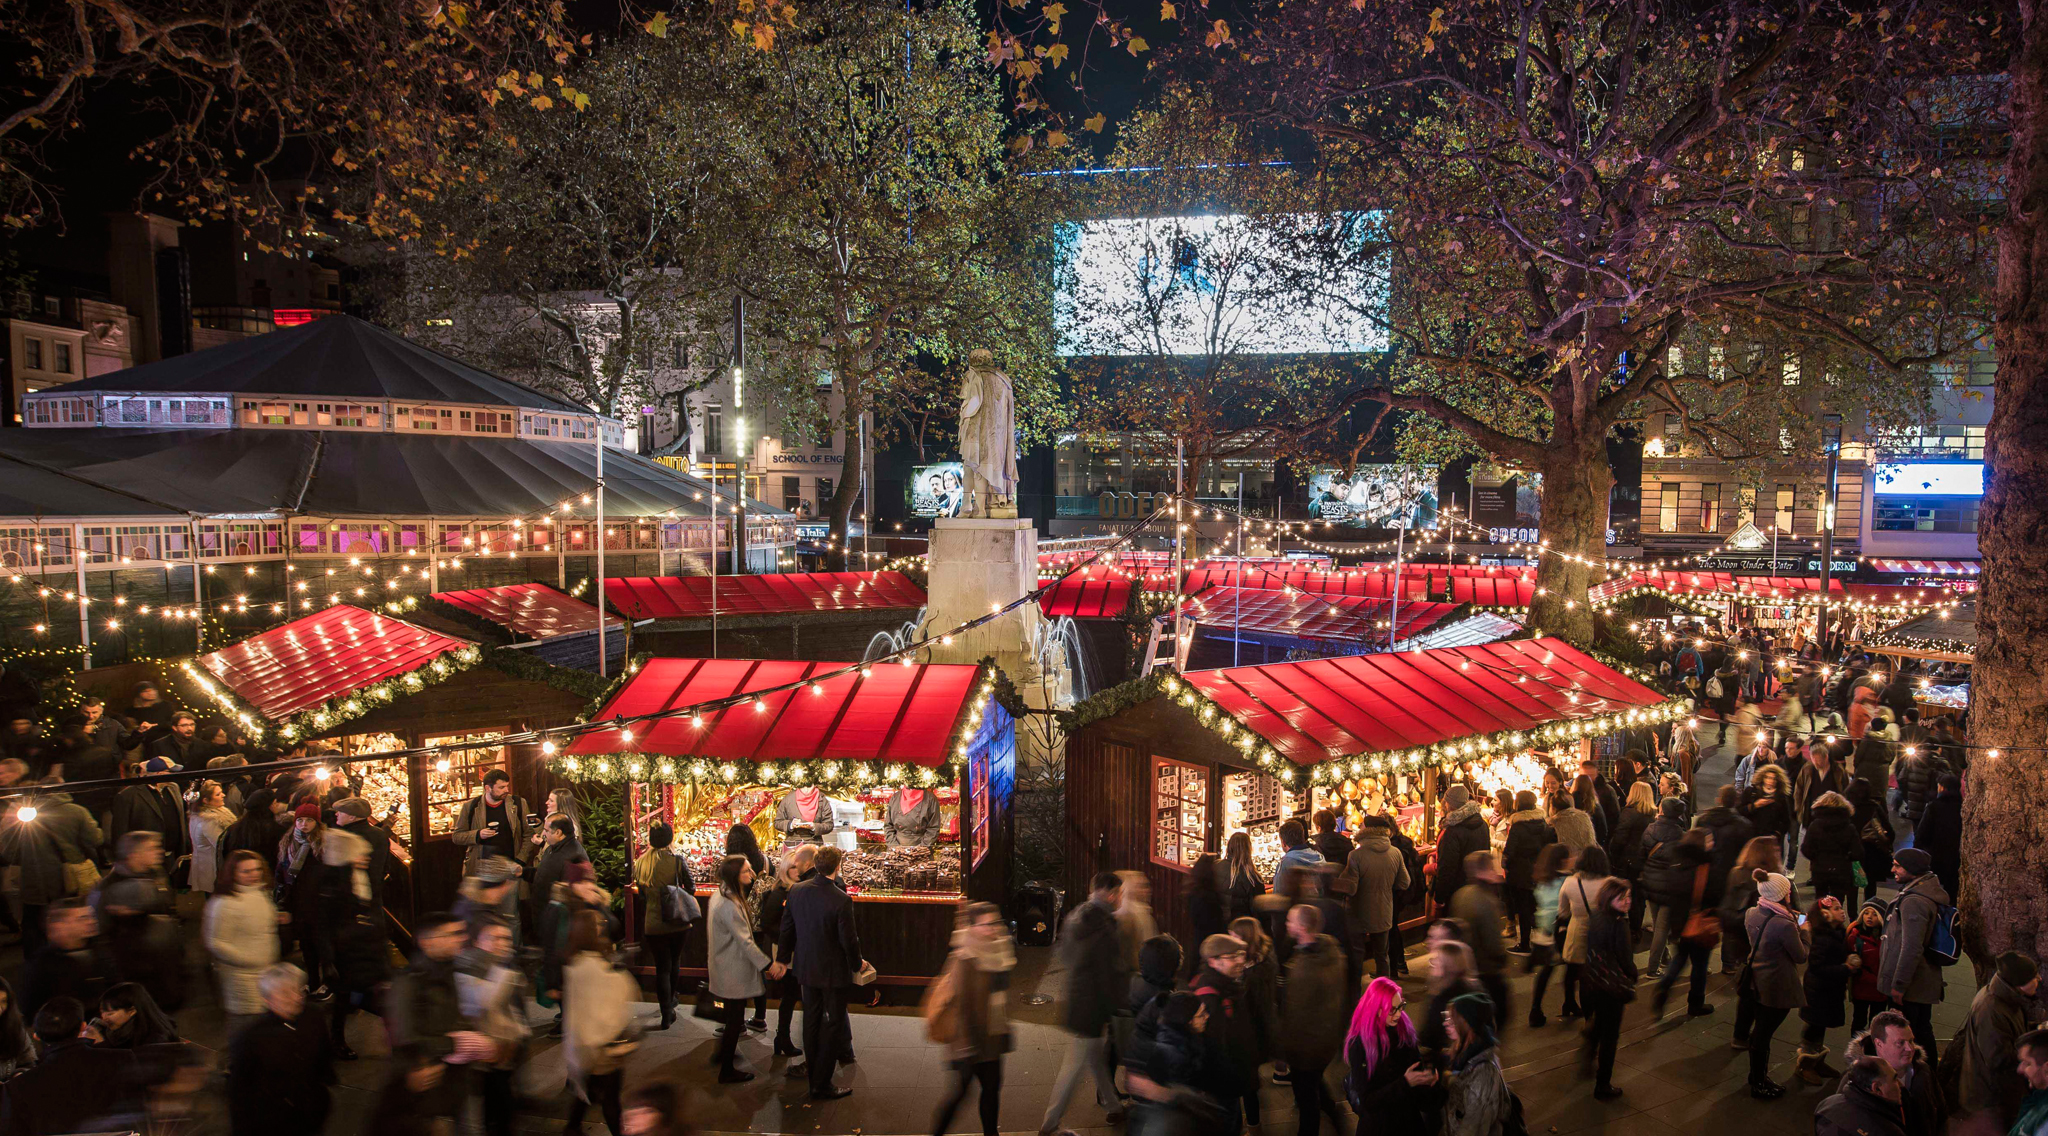 Leicester Square Christmas market 2017: everything you need to know